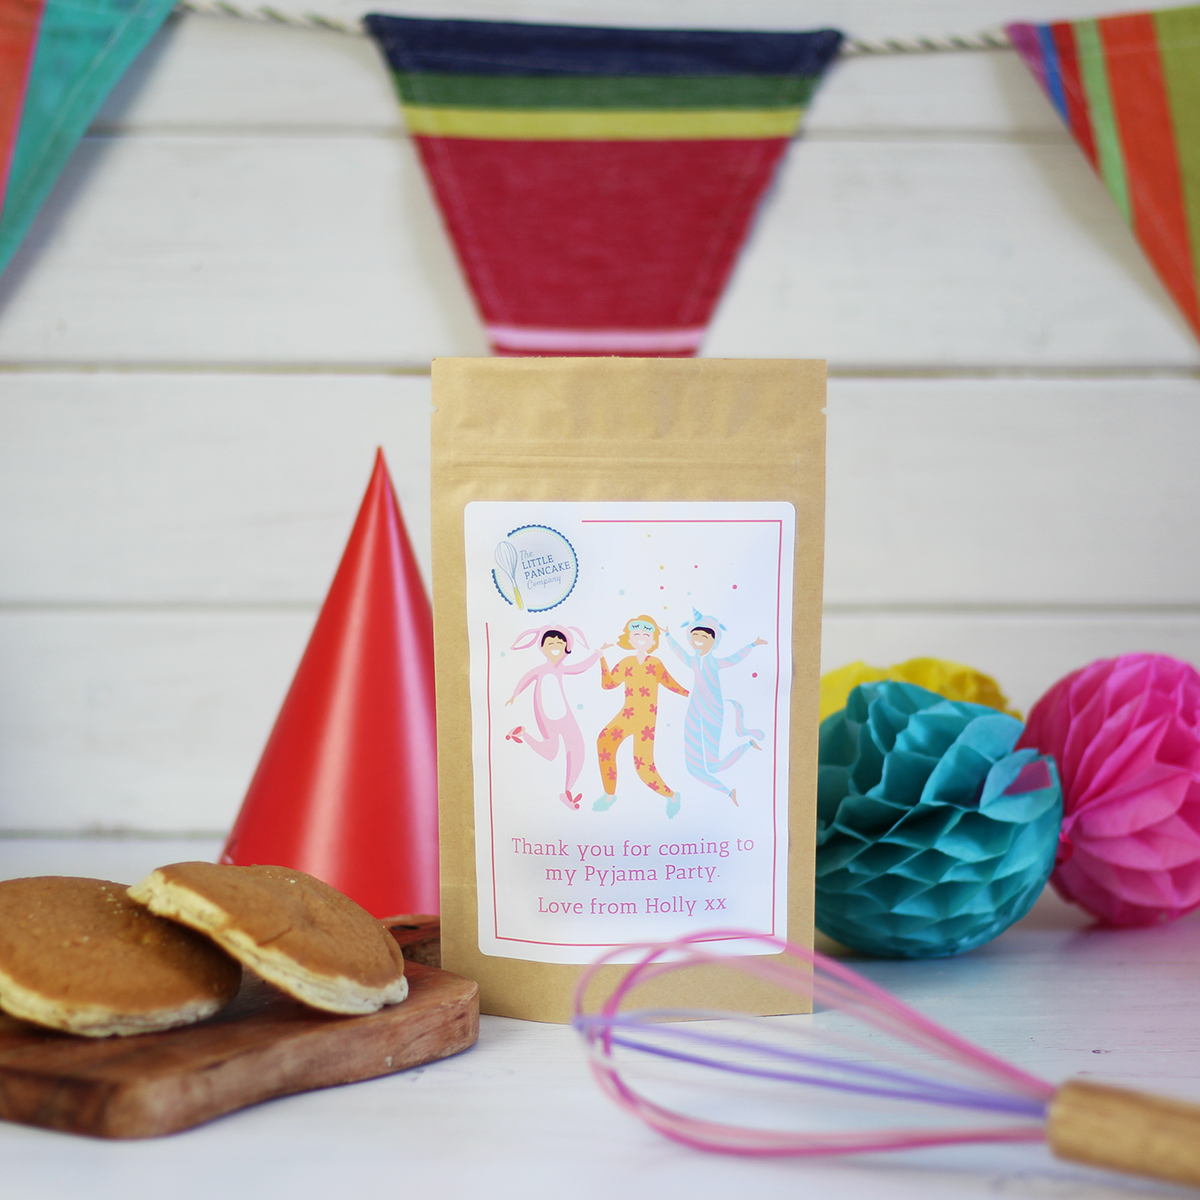 Pancake Sleepover Party Mix The Bags - Pancake Company Personalised Little